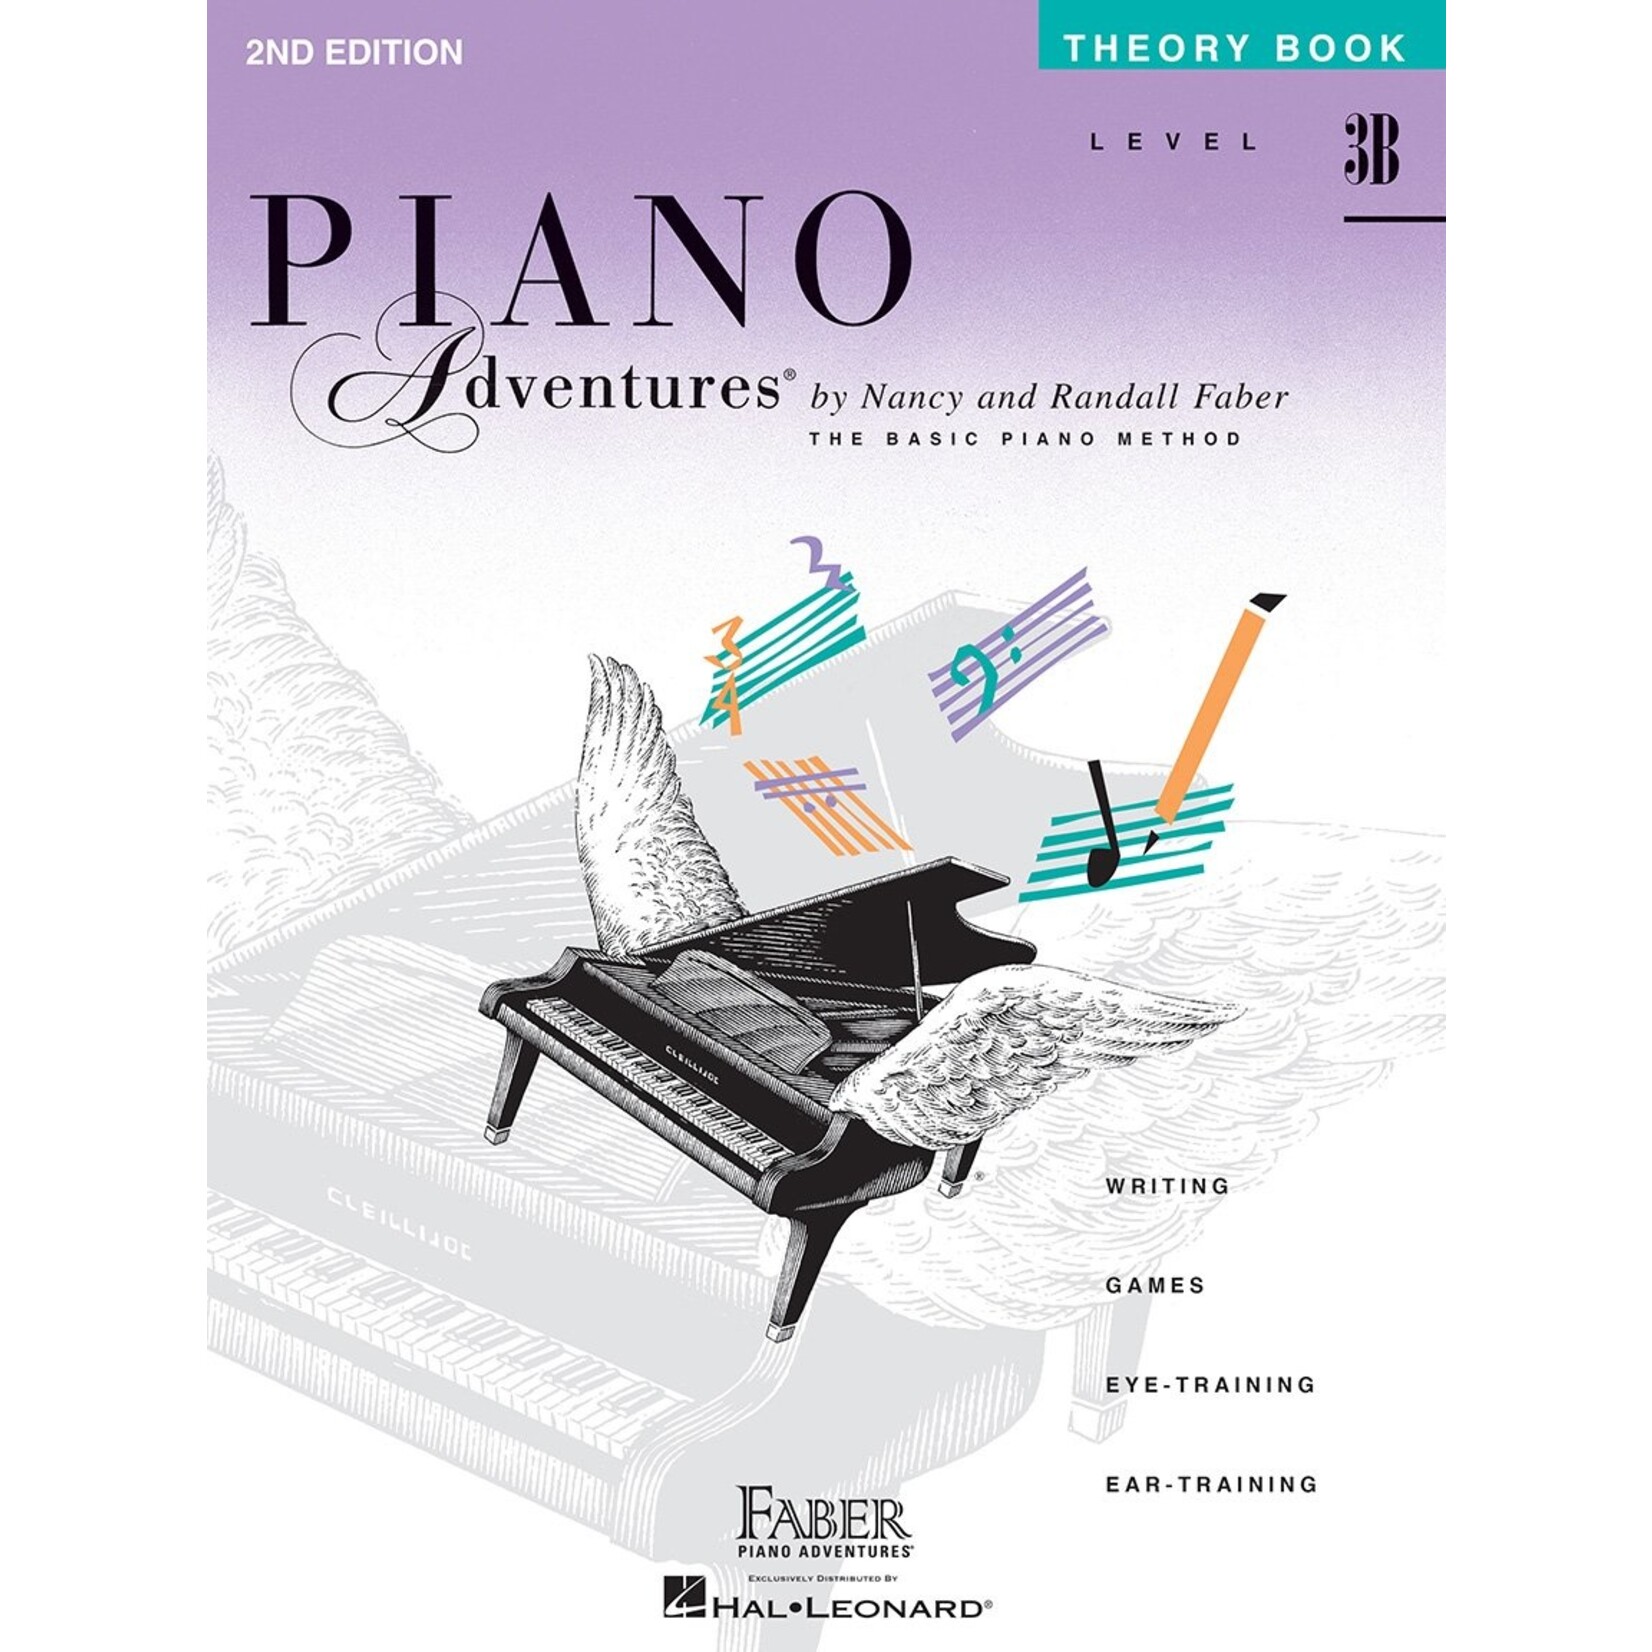 Faber Piano Adventures Level 3B - Theory Book